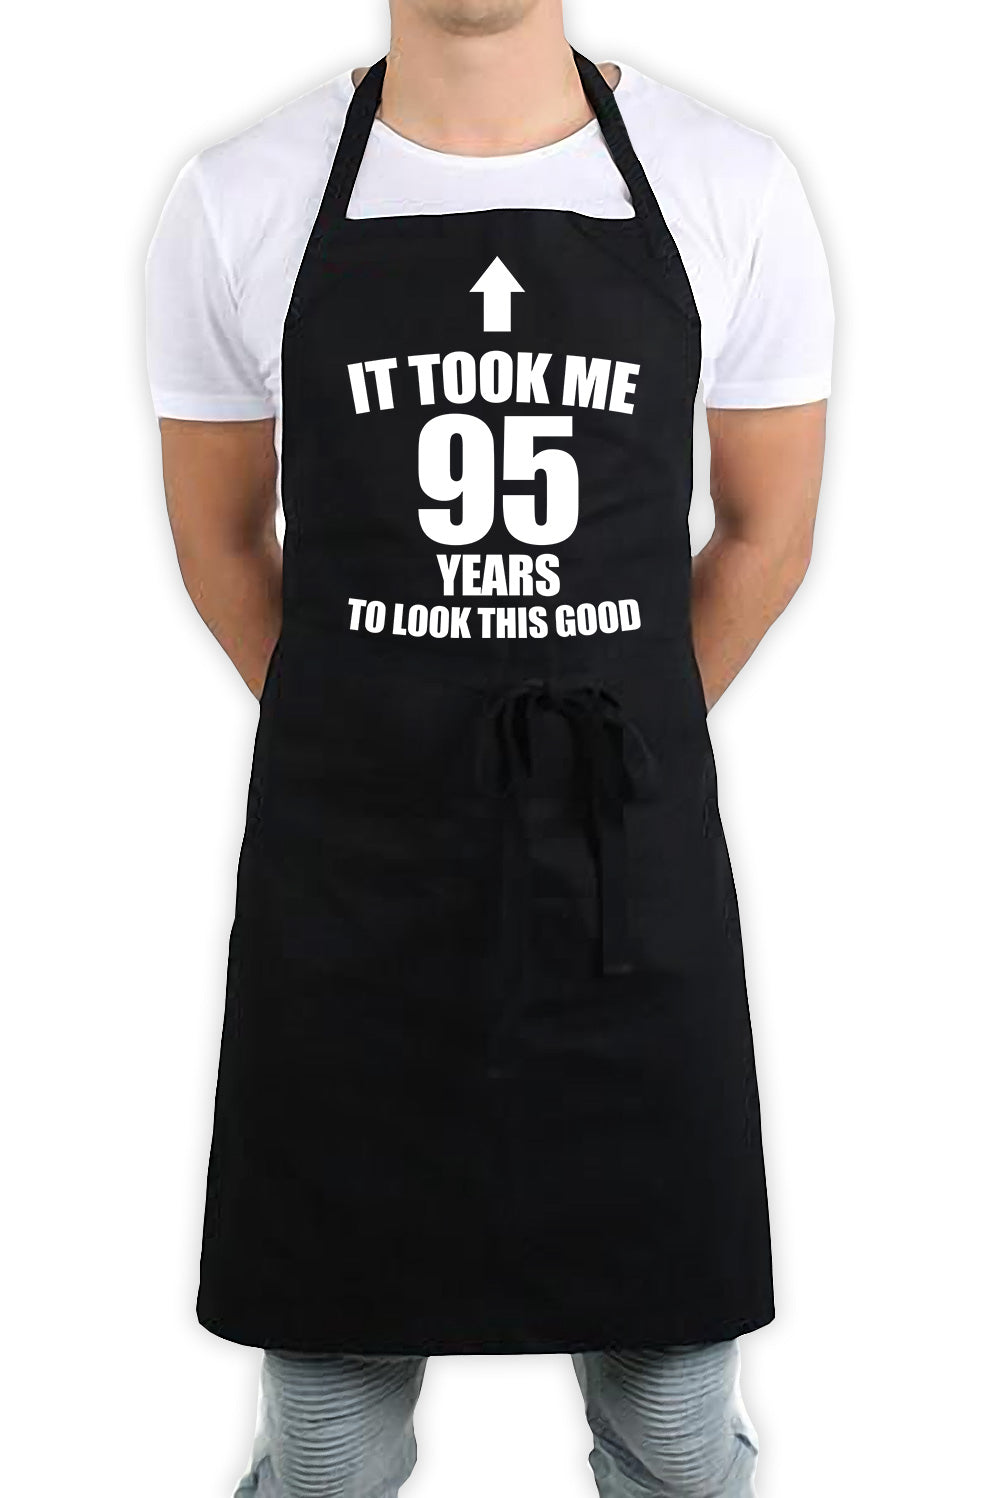 It Took Me 95 Years To Look This Good Funny Kitchen BBQ Apron Black